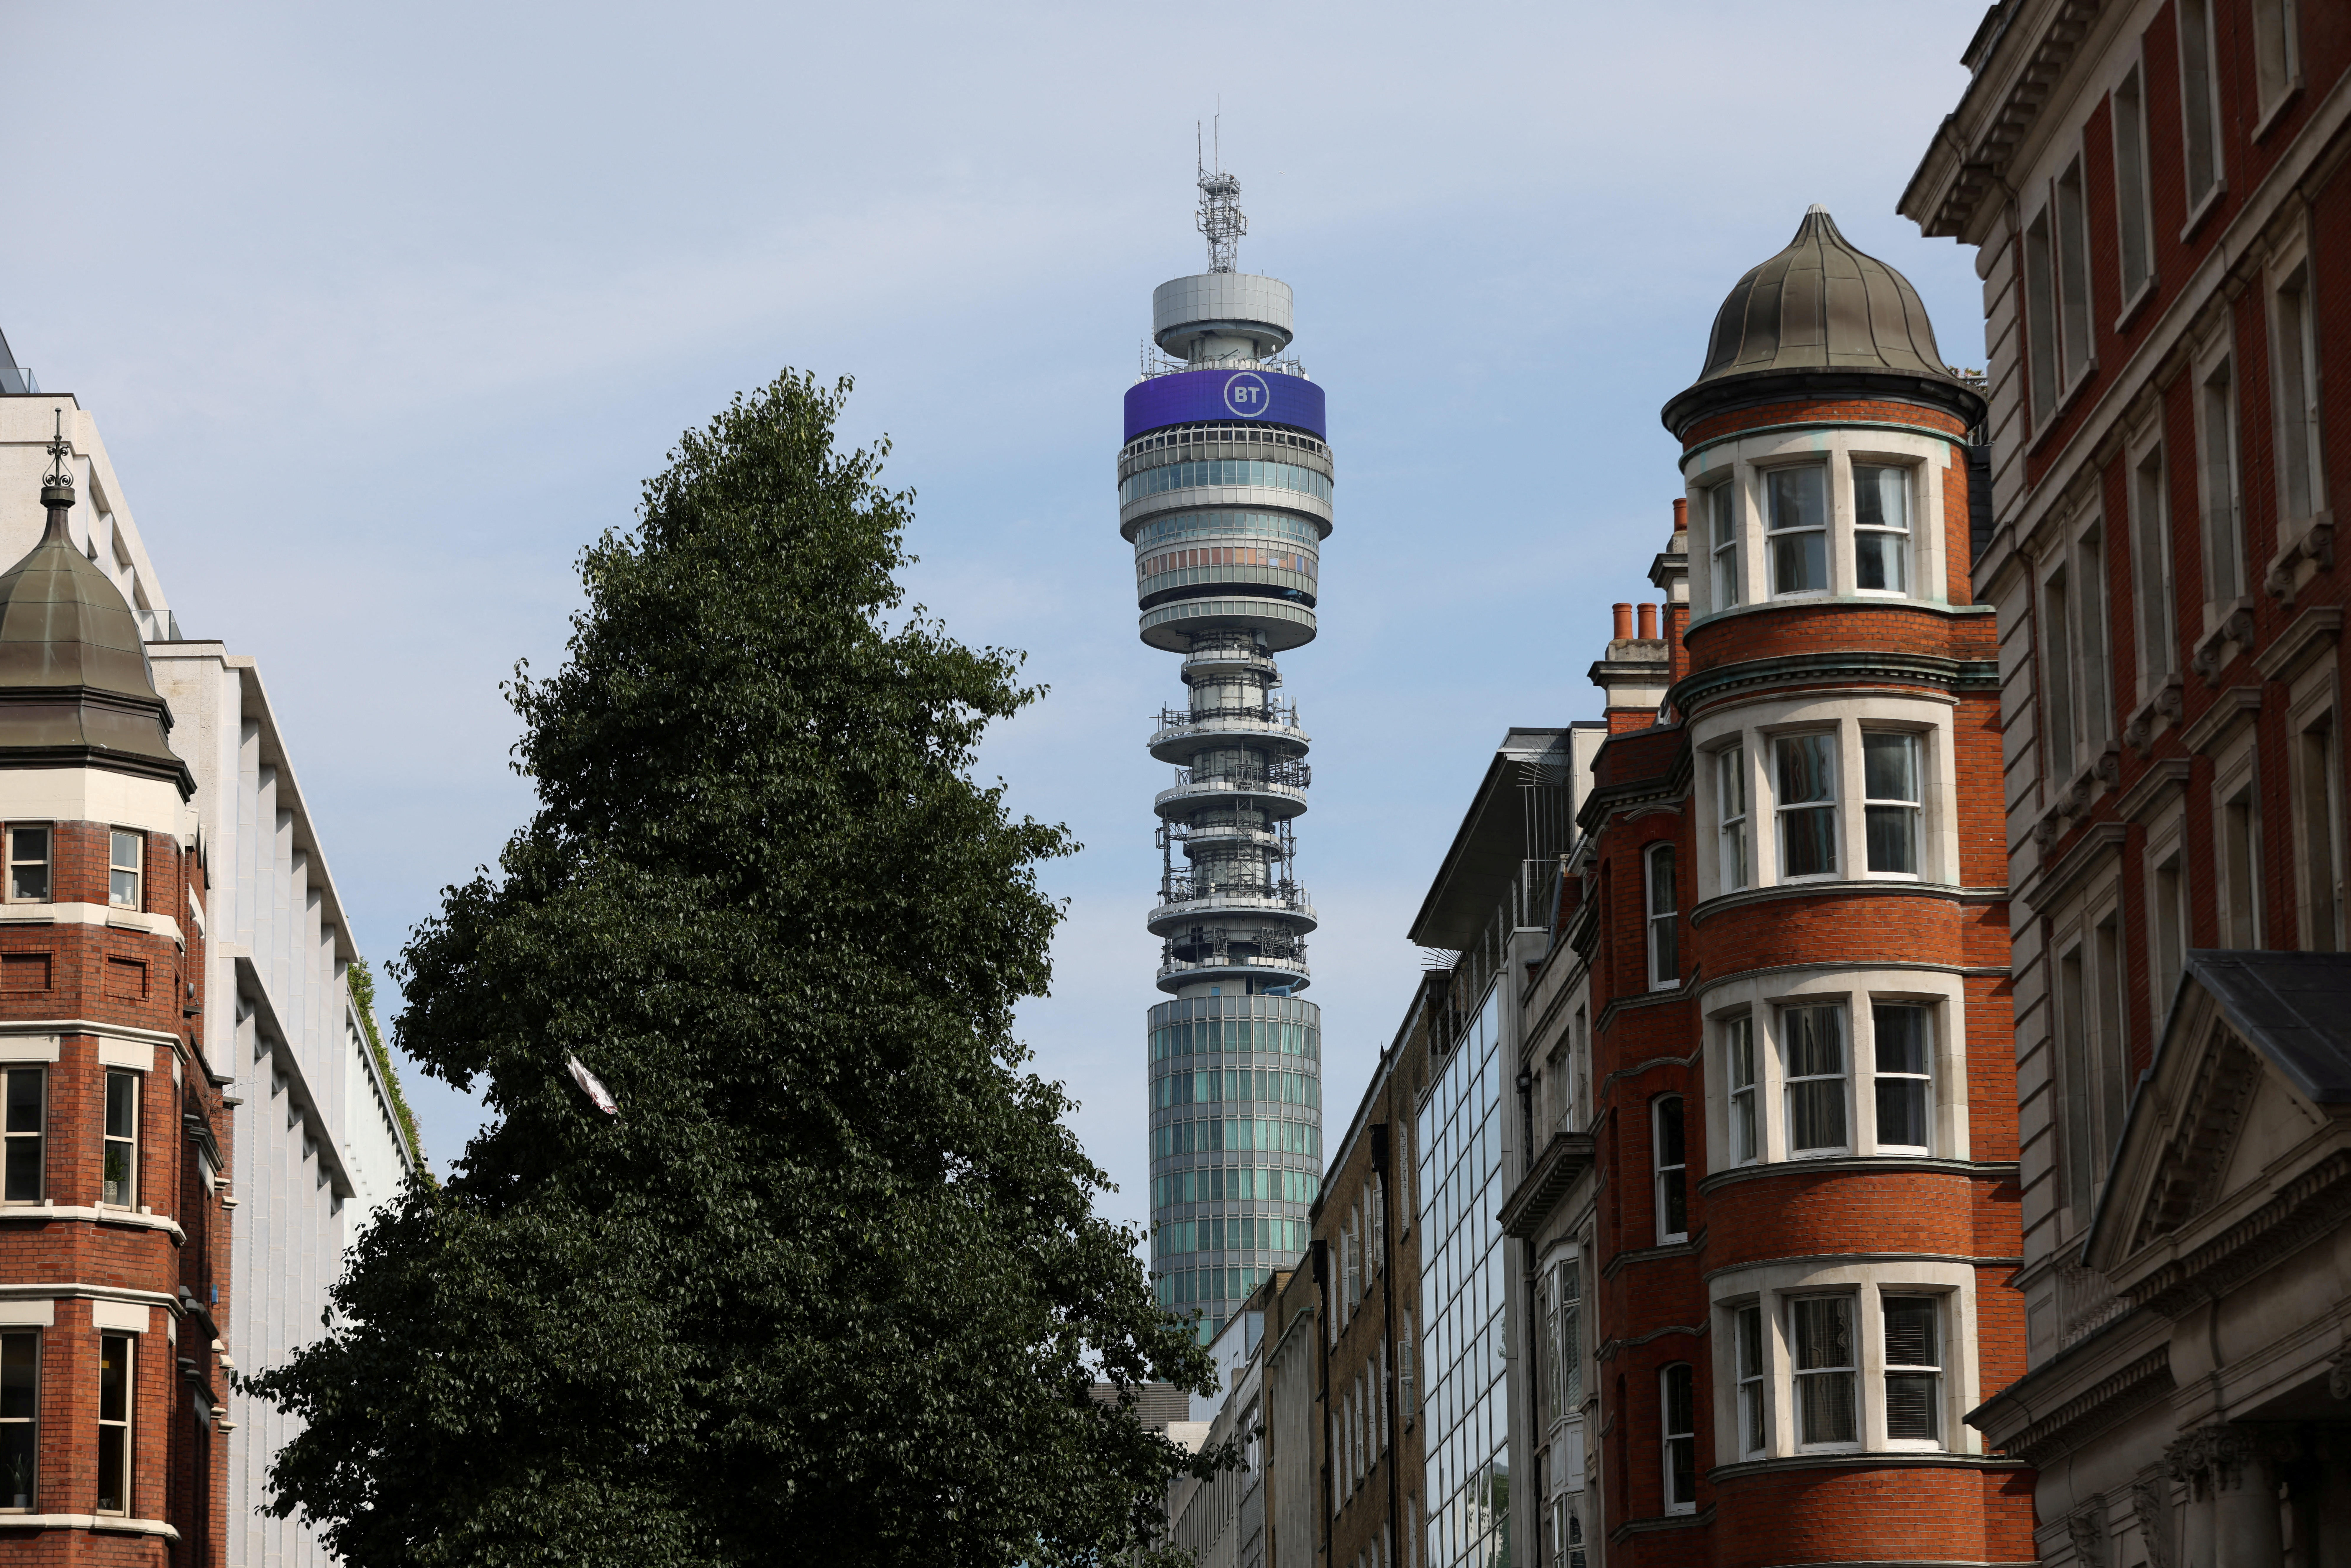 View of BT Group logo displayed on BT tower, in London